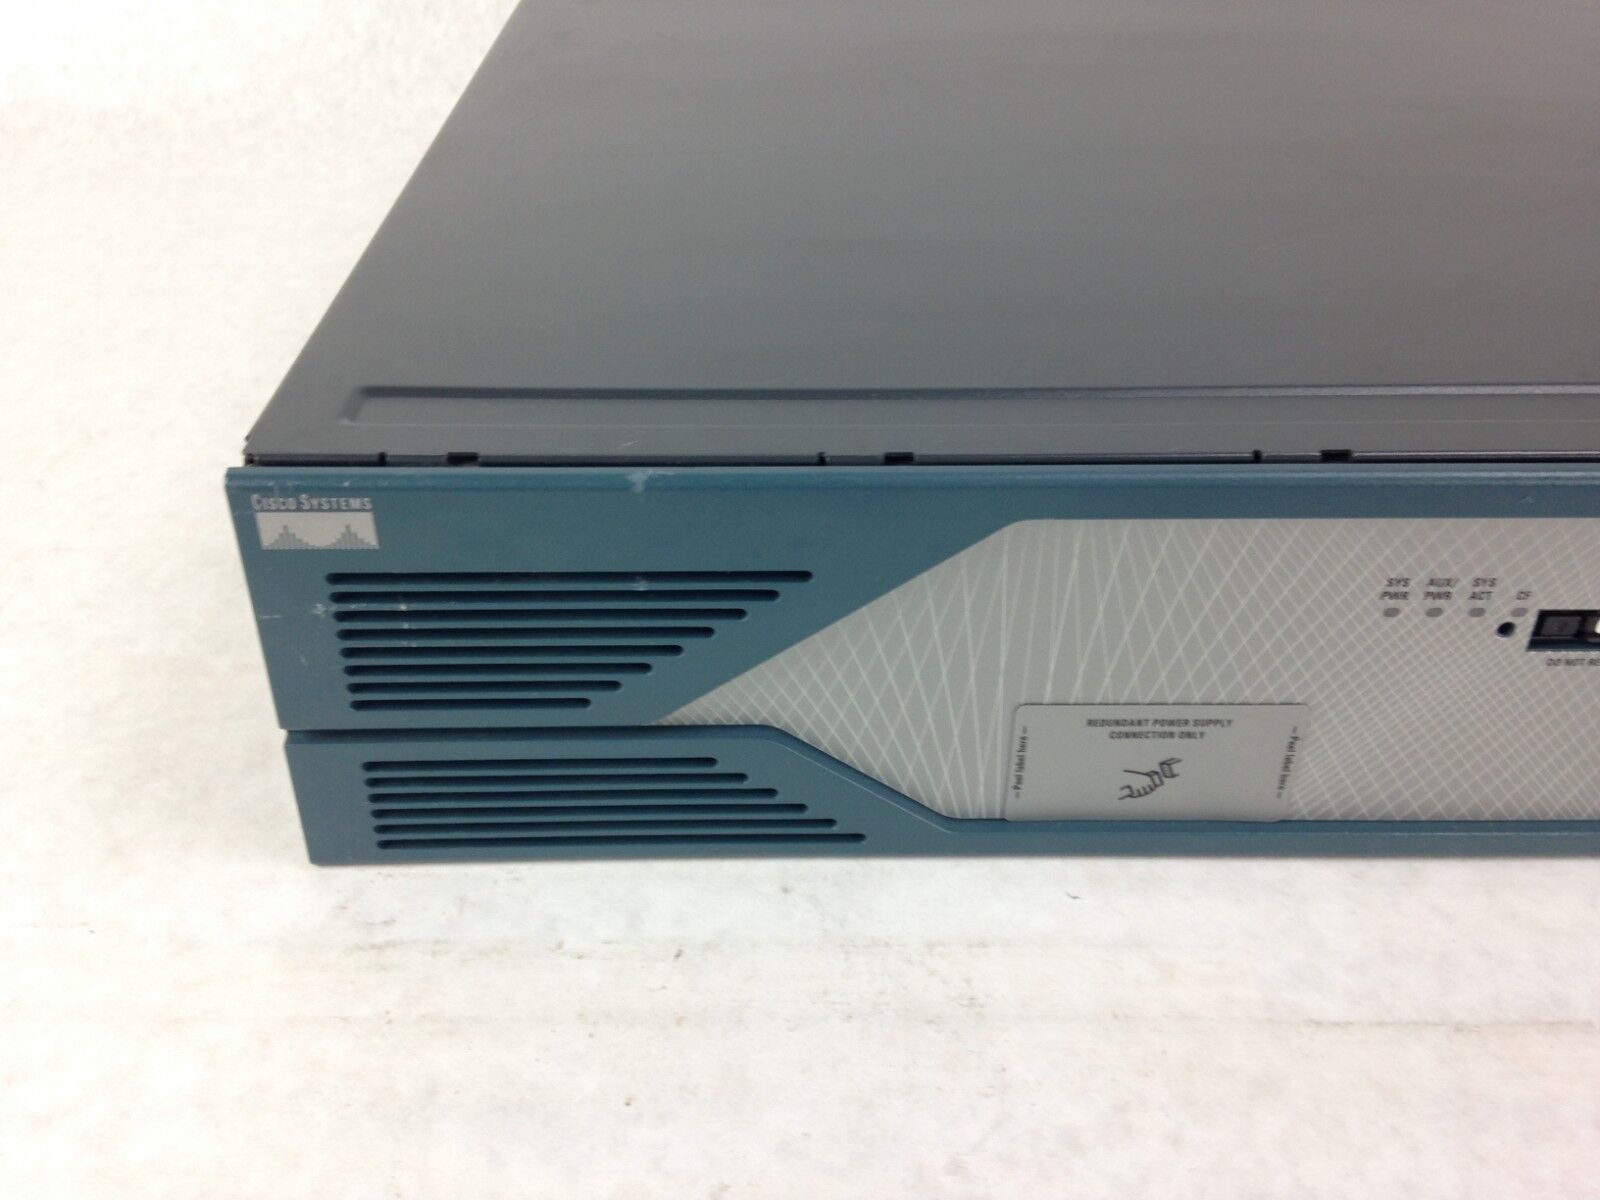 Cisco 2800 Series Model: 2801 V05 Integrated Service Router